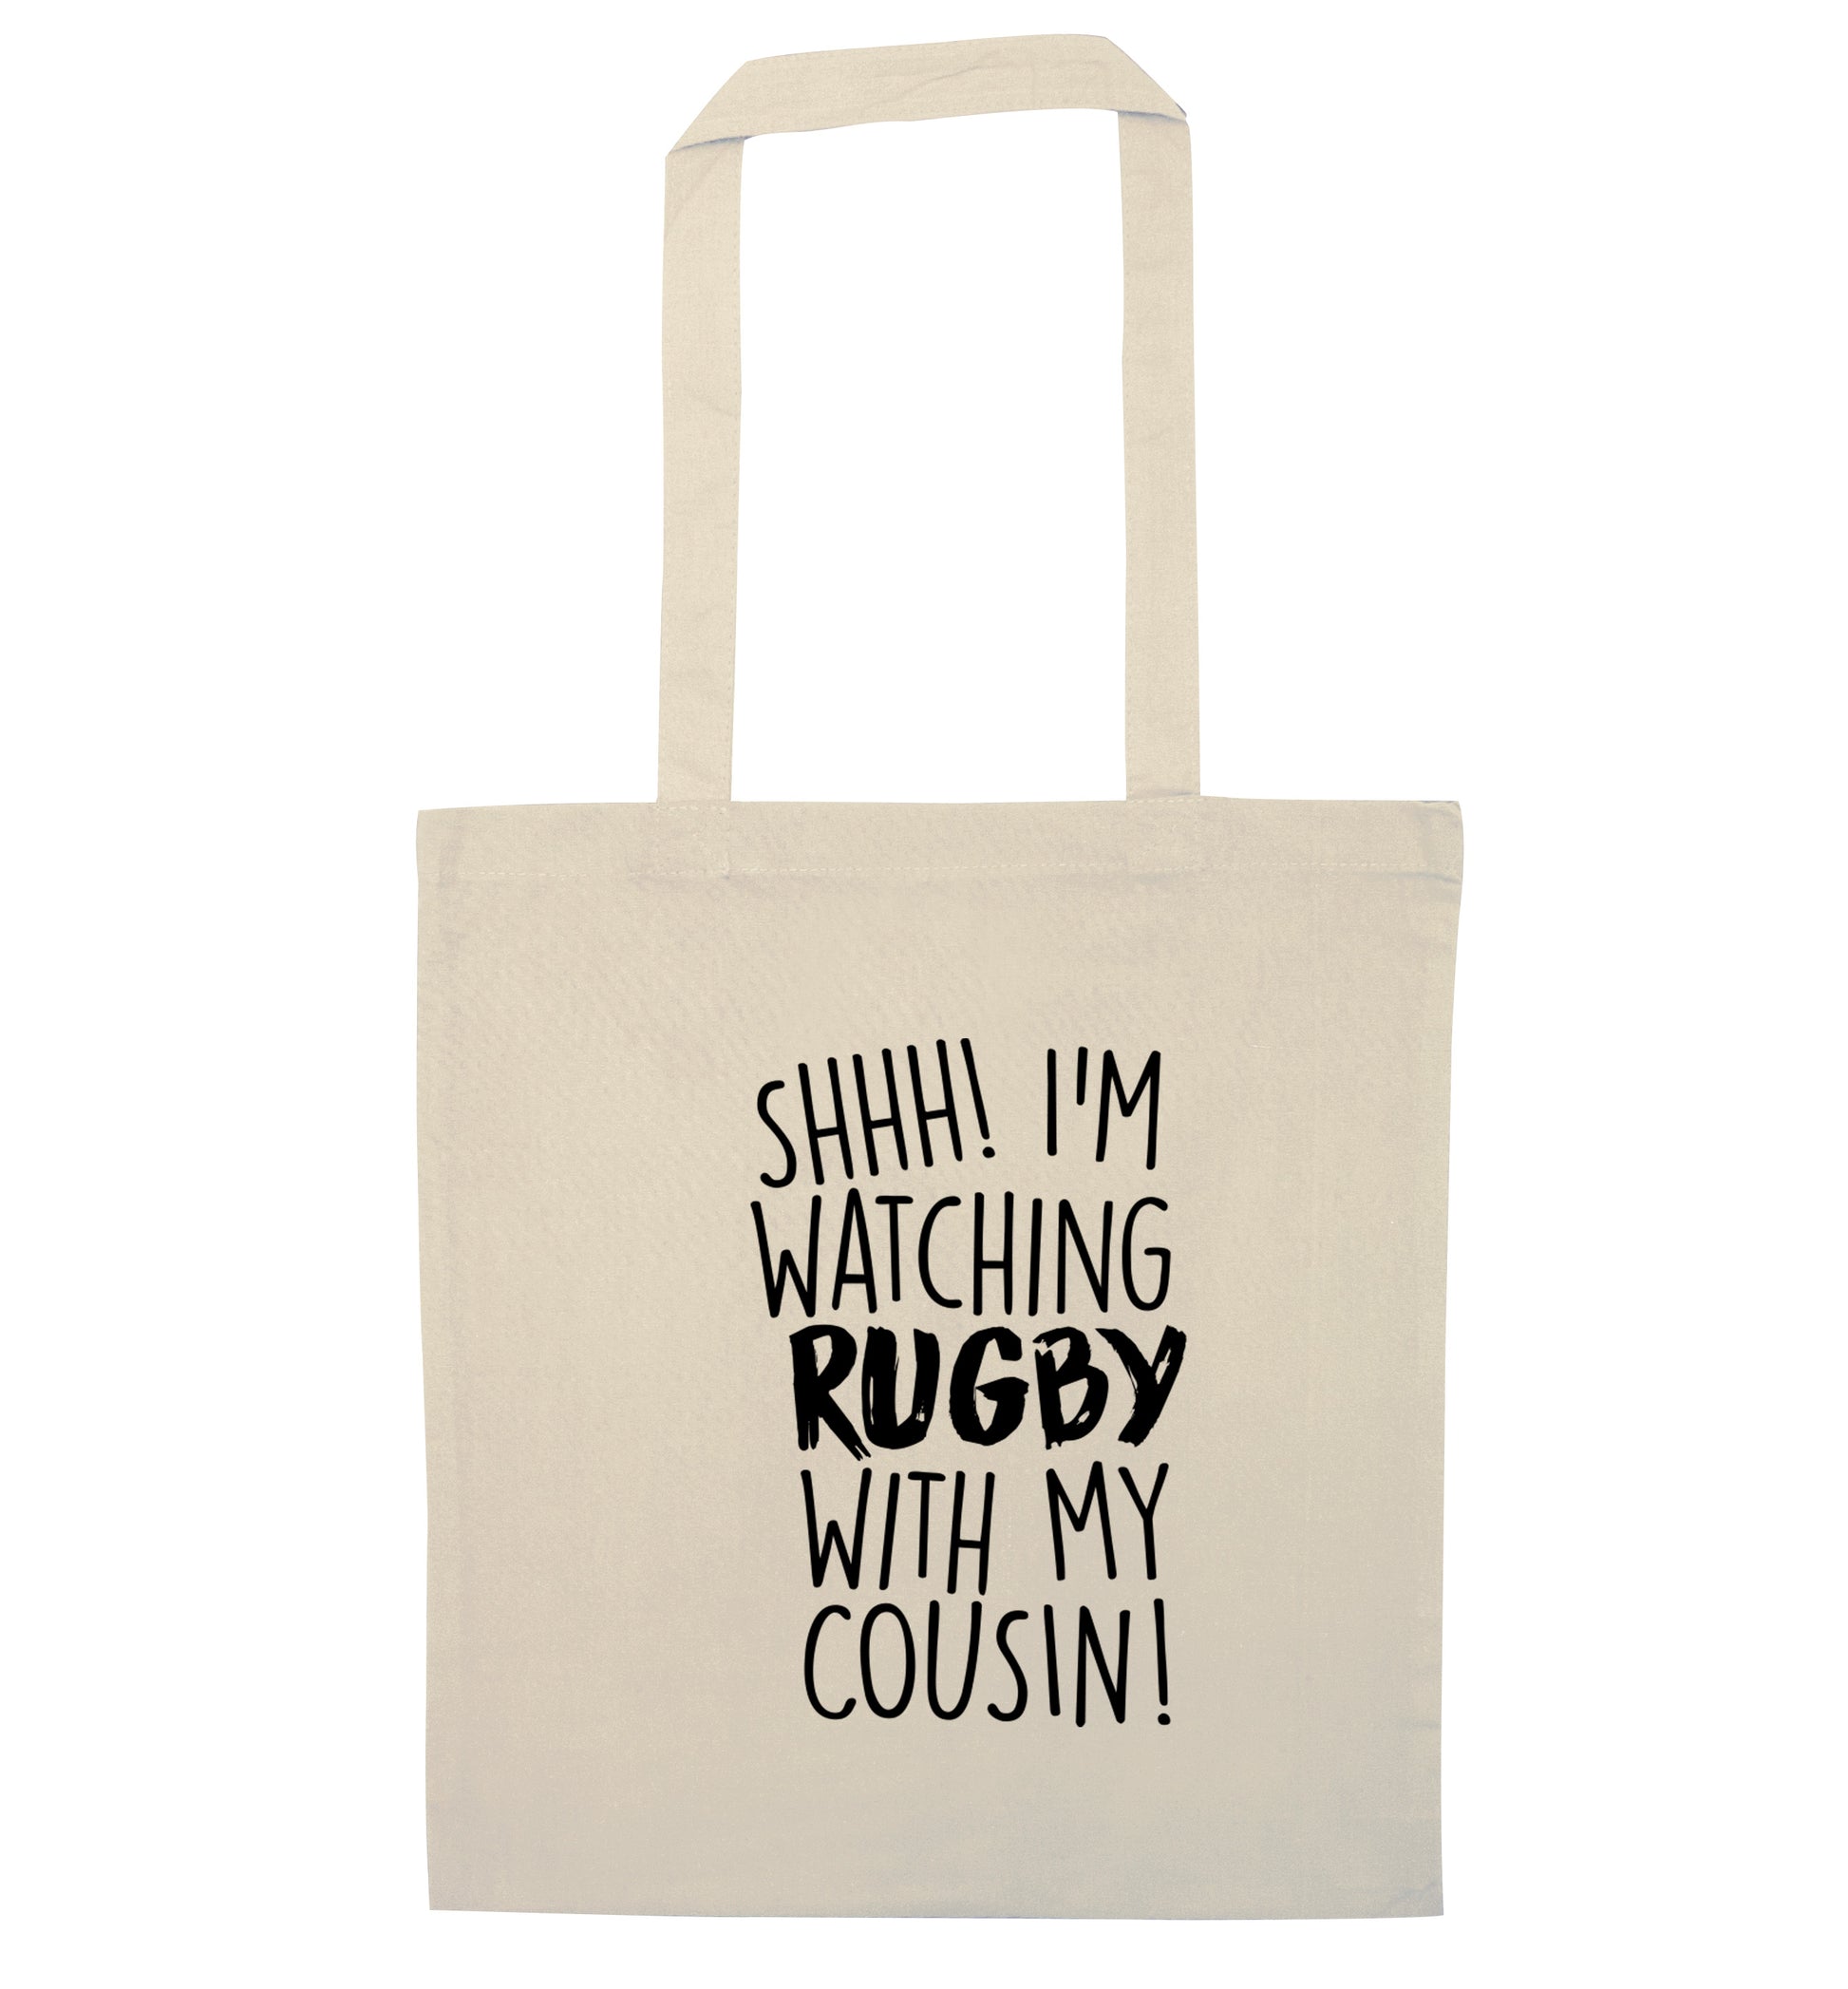 Shhh I'm watching rugby with my cousin natural tote bag